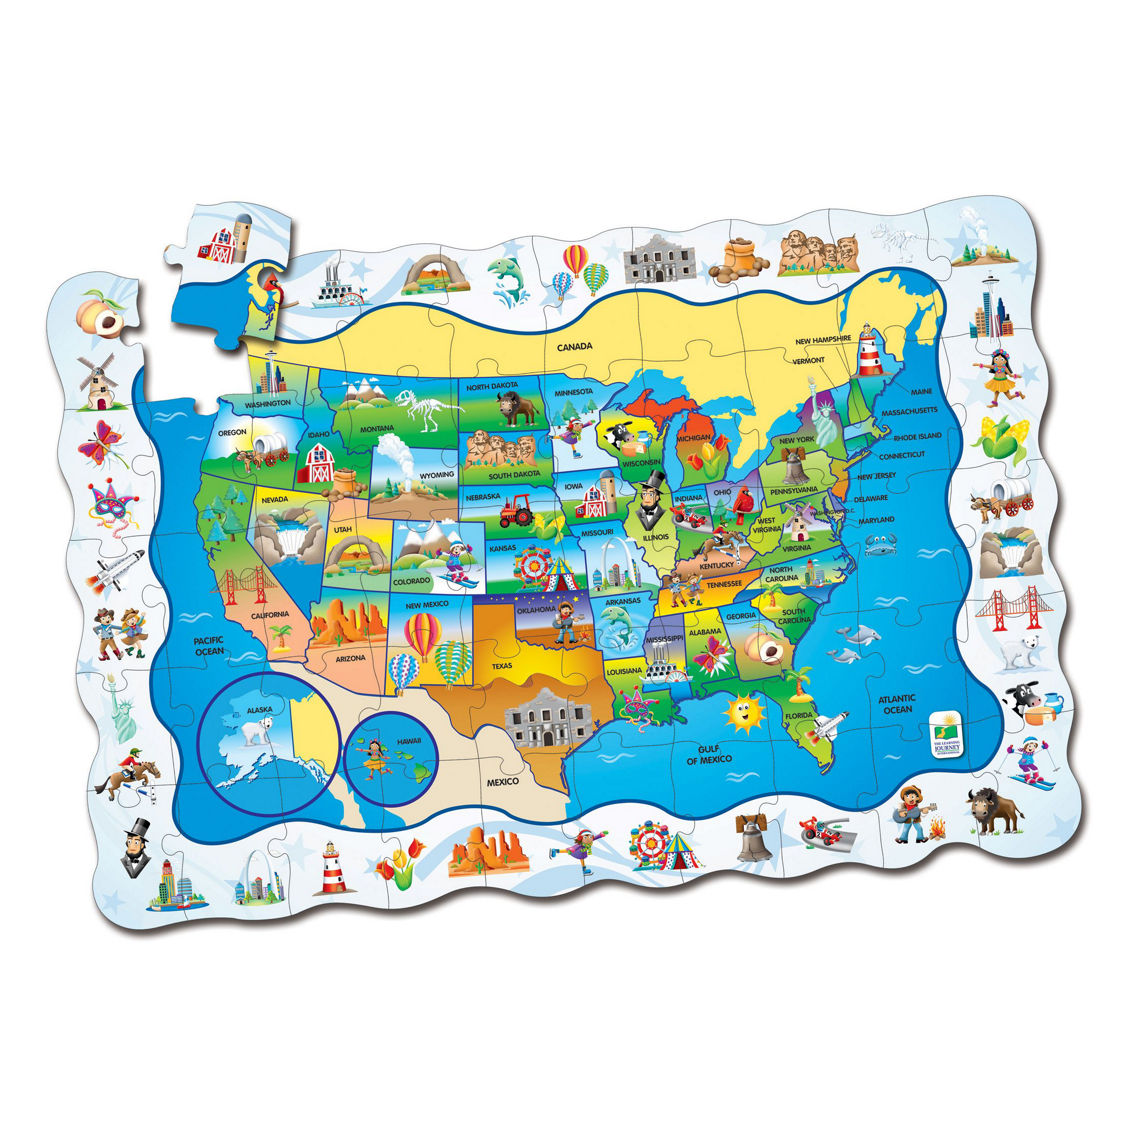 The Learning Journey Puzzle Doubles! - Find It! USA: 50 Pcs - Image 2 of 2